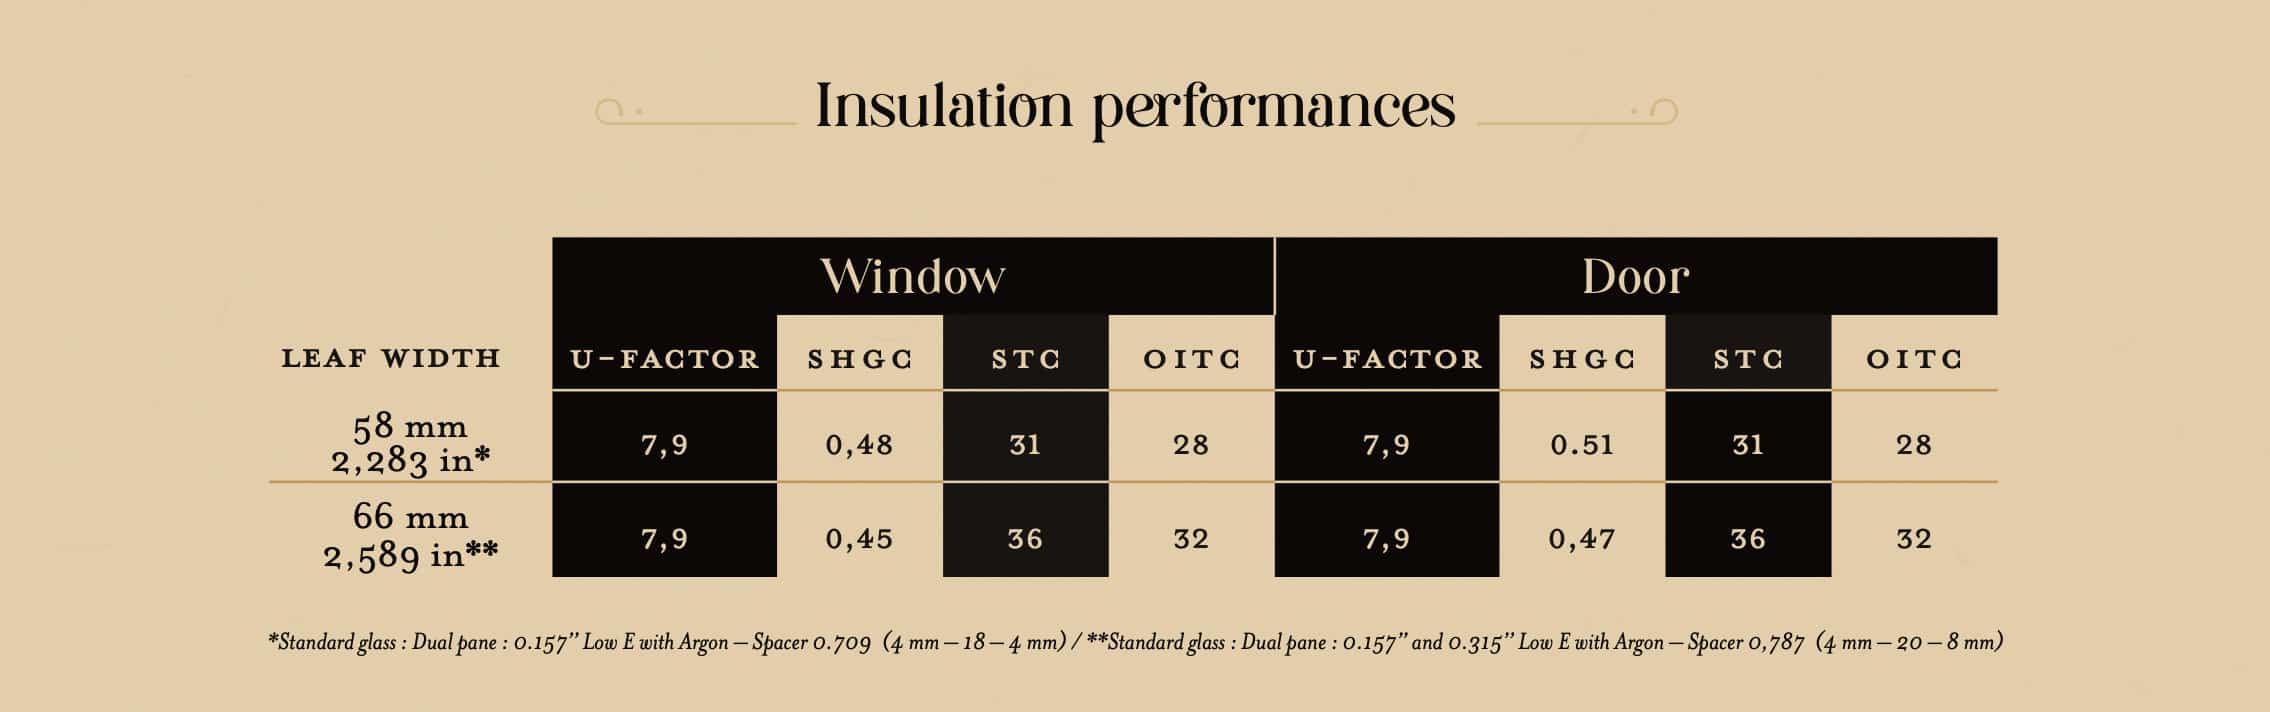 Chart providing Insulation Performance data for various types of window and door glass.